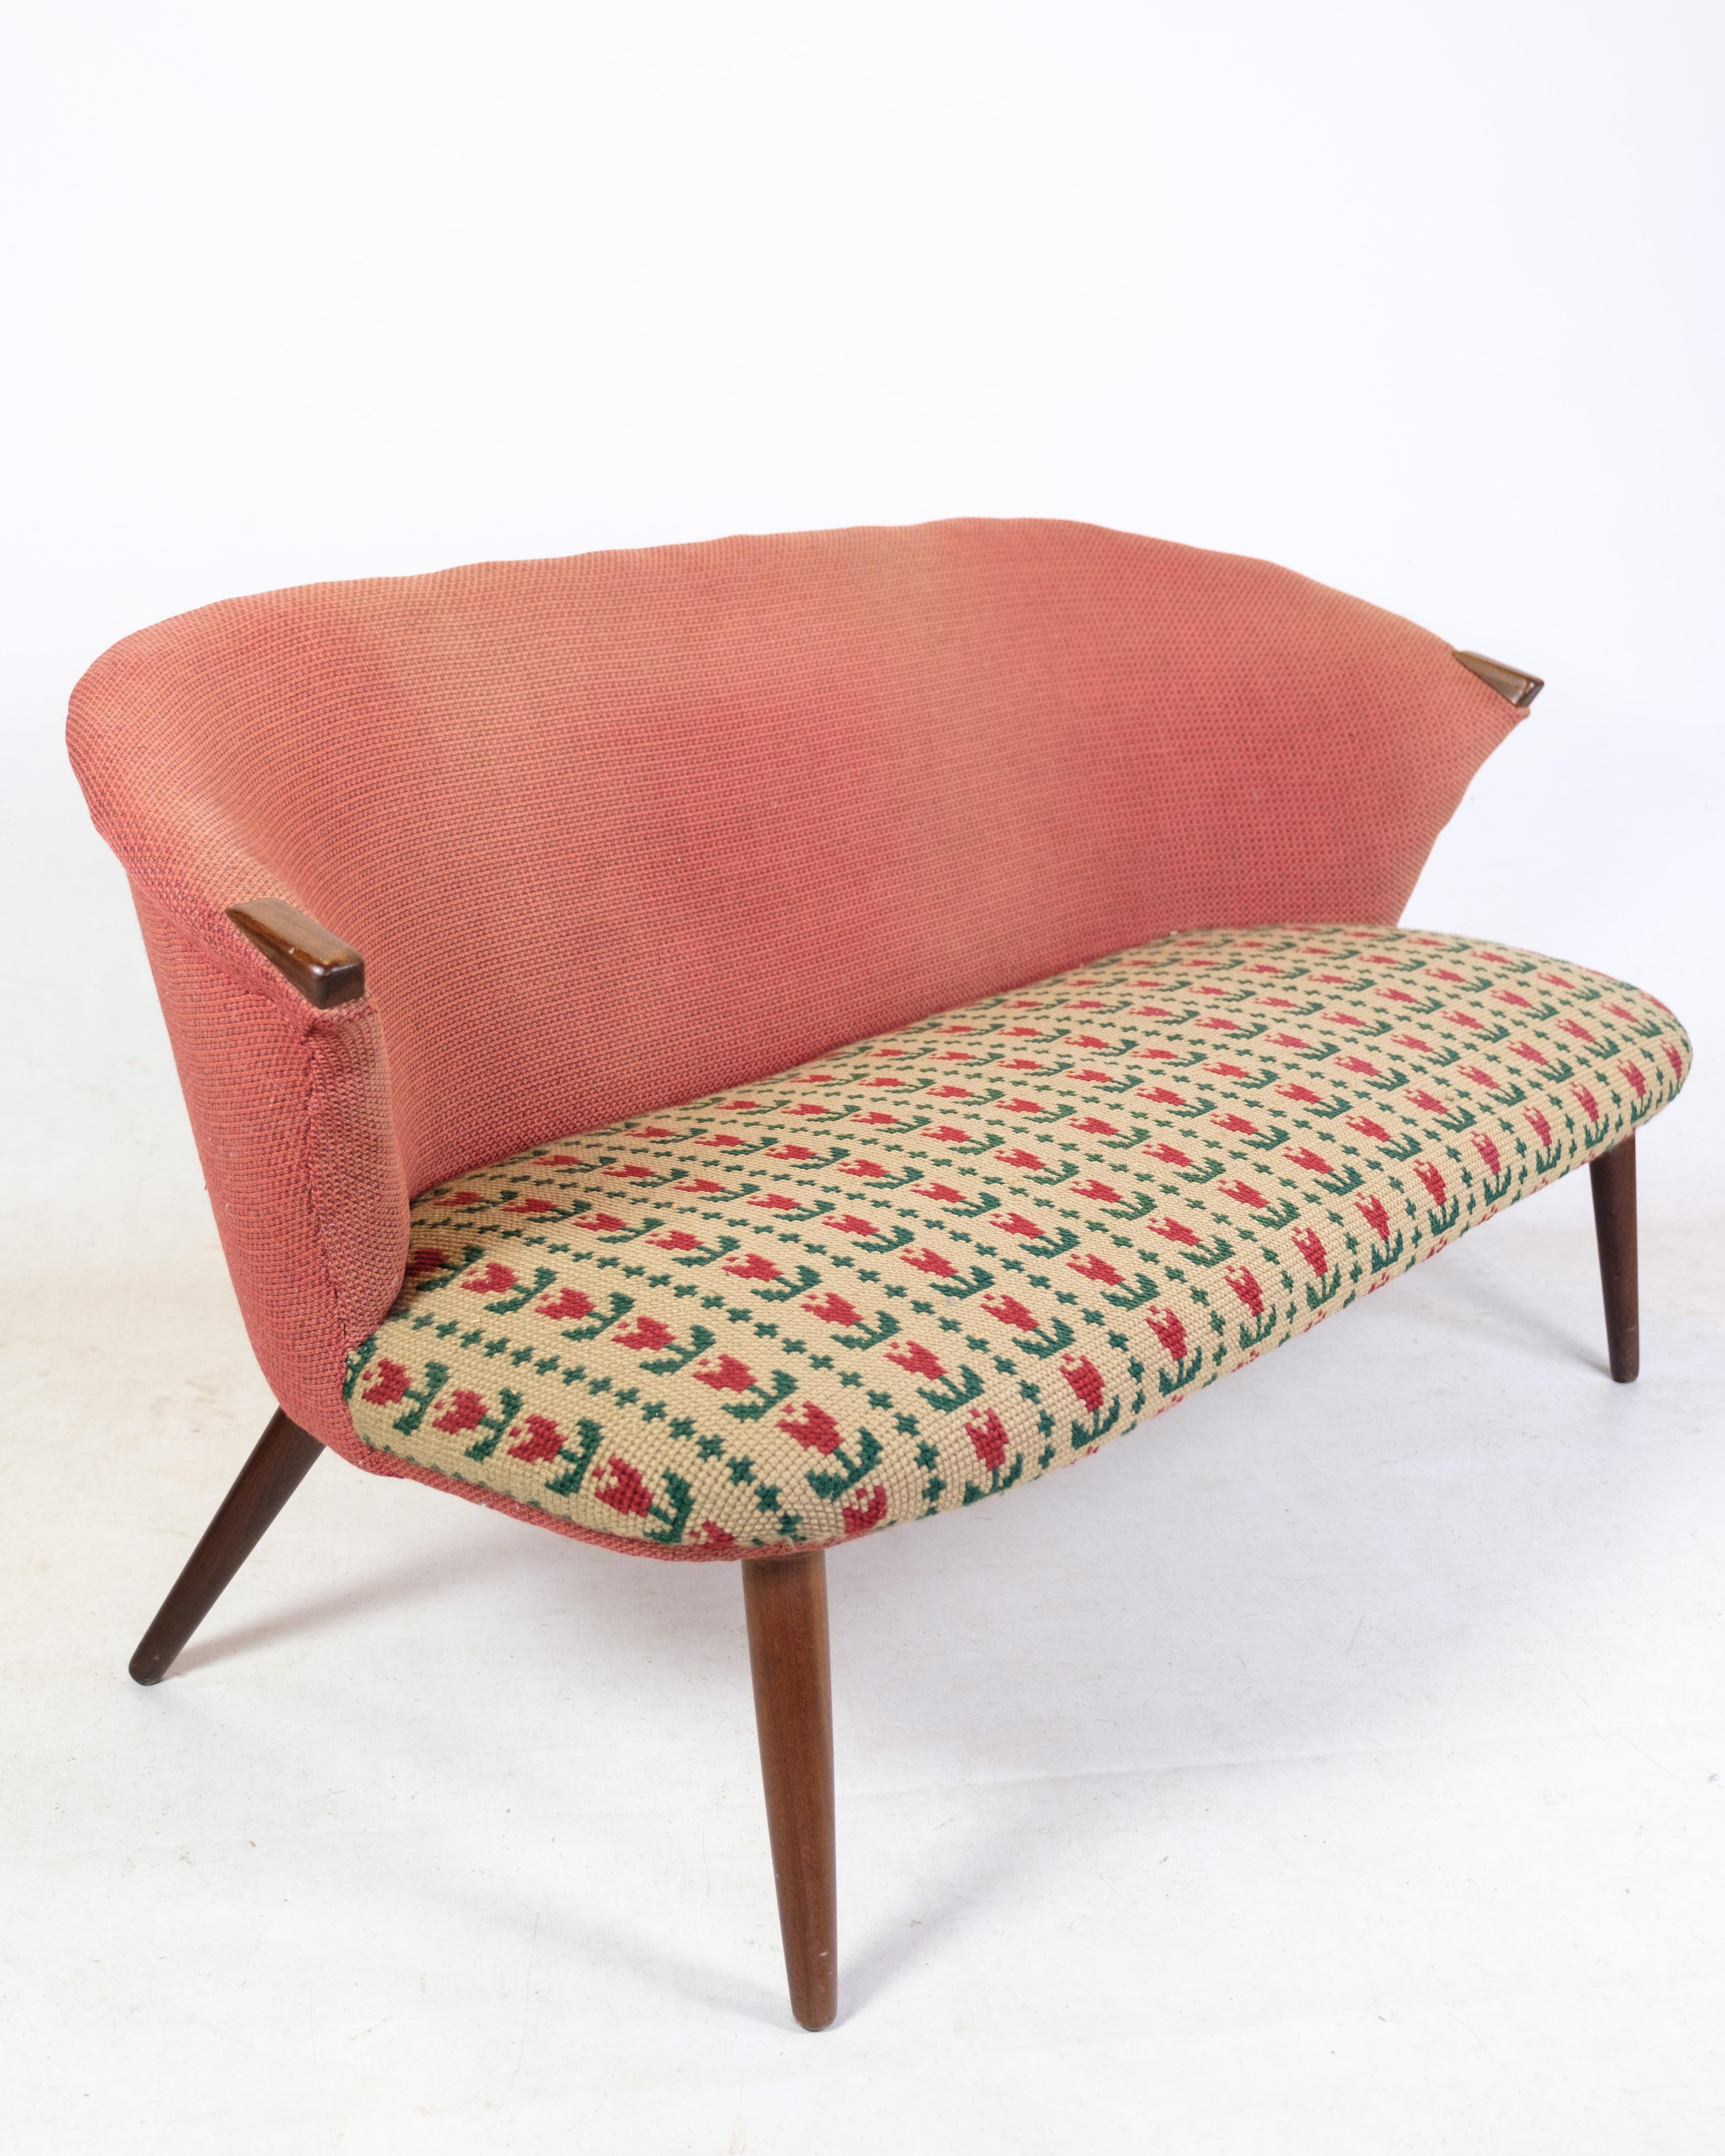 Two-person sofa, designed by Bent Møller Jepsen with teak legs and nails covered with patterned fabric from around the 1950s. With original upholstery. Still Excellent sitting comfort. 
Measurements in cm: H:71 W:142 D:50 SH:35